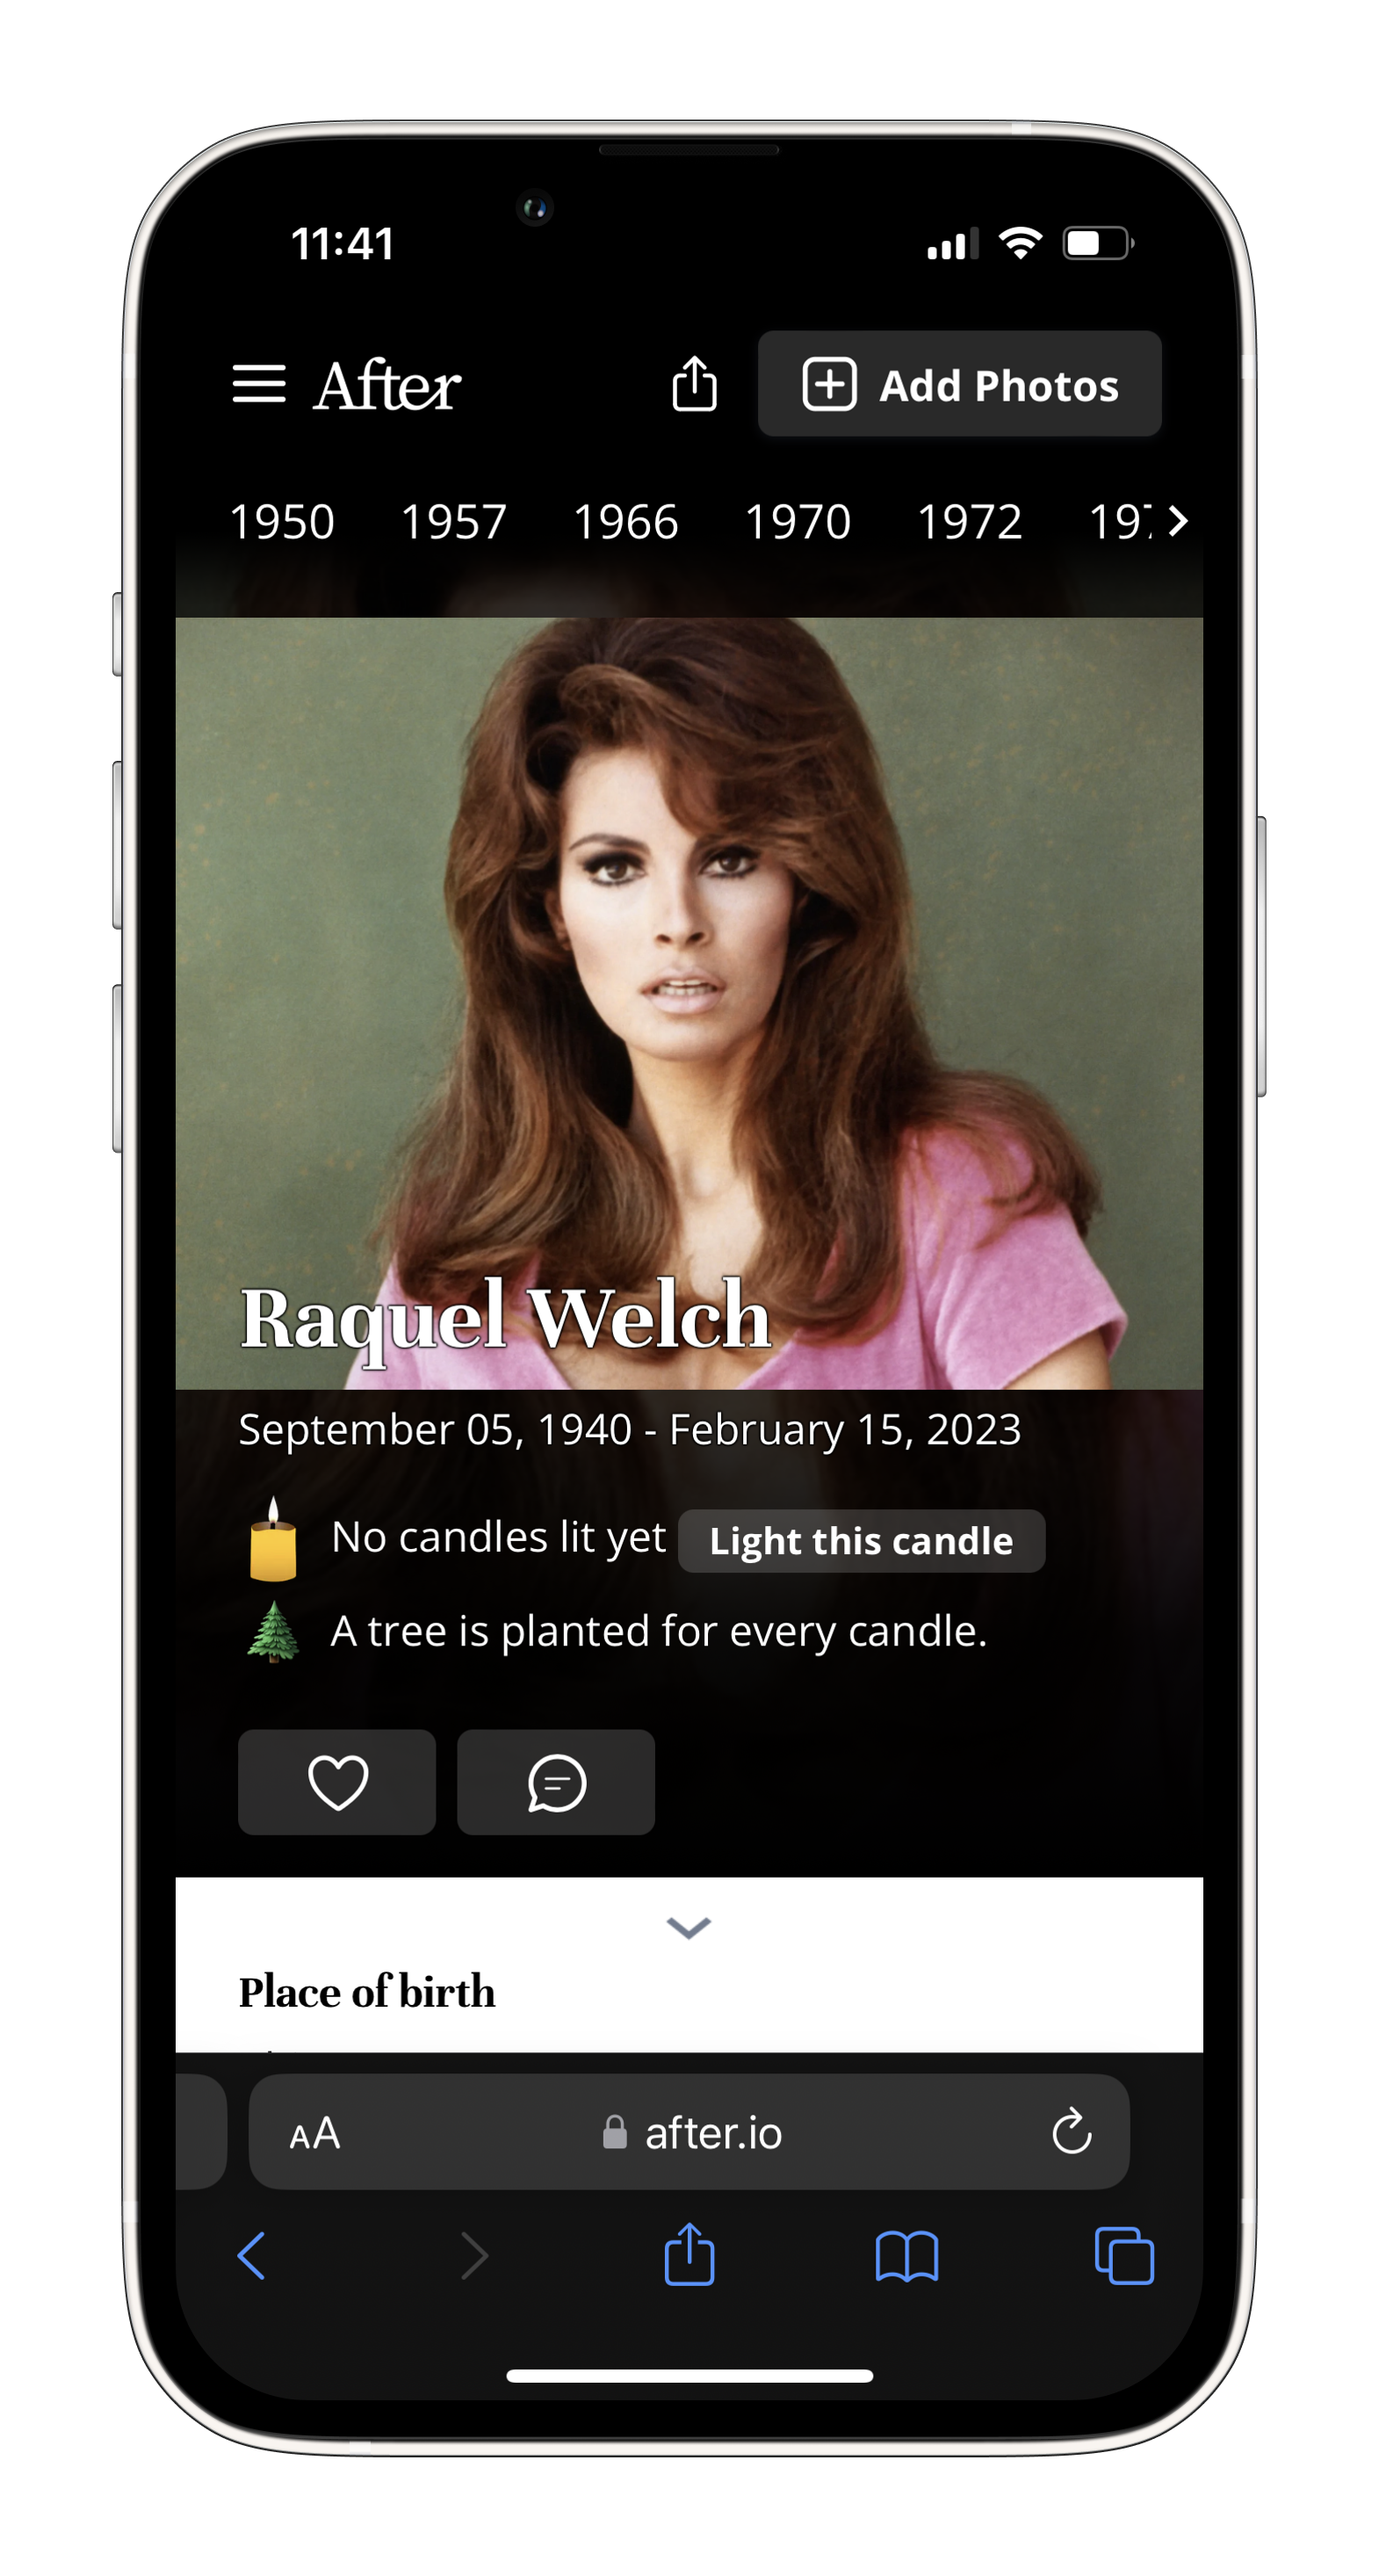 Raquel Welch memorial in After viewed in an iPhone